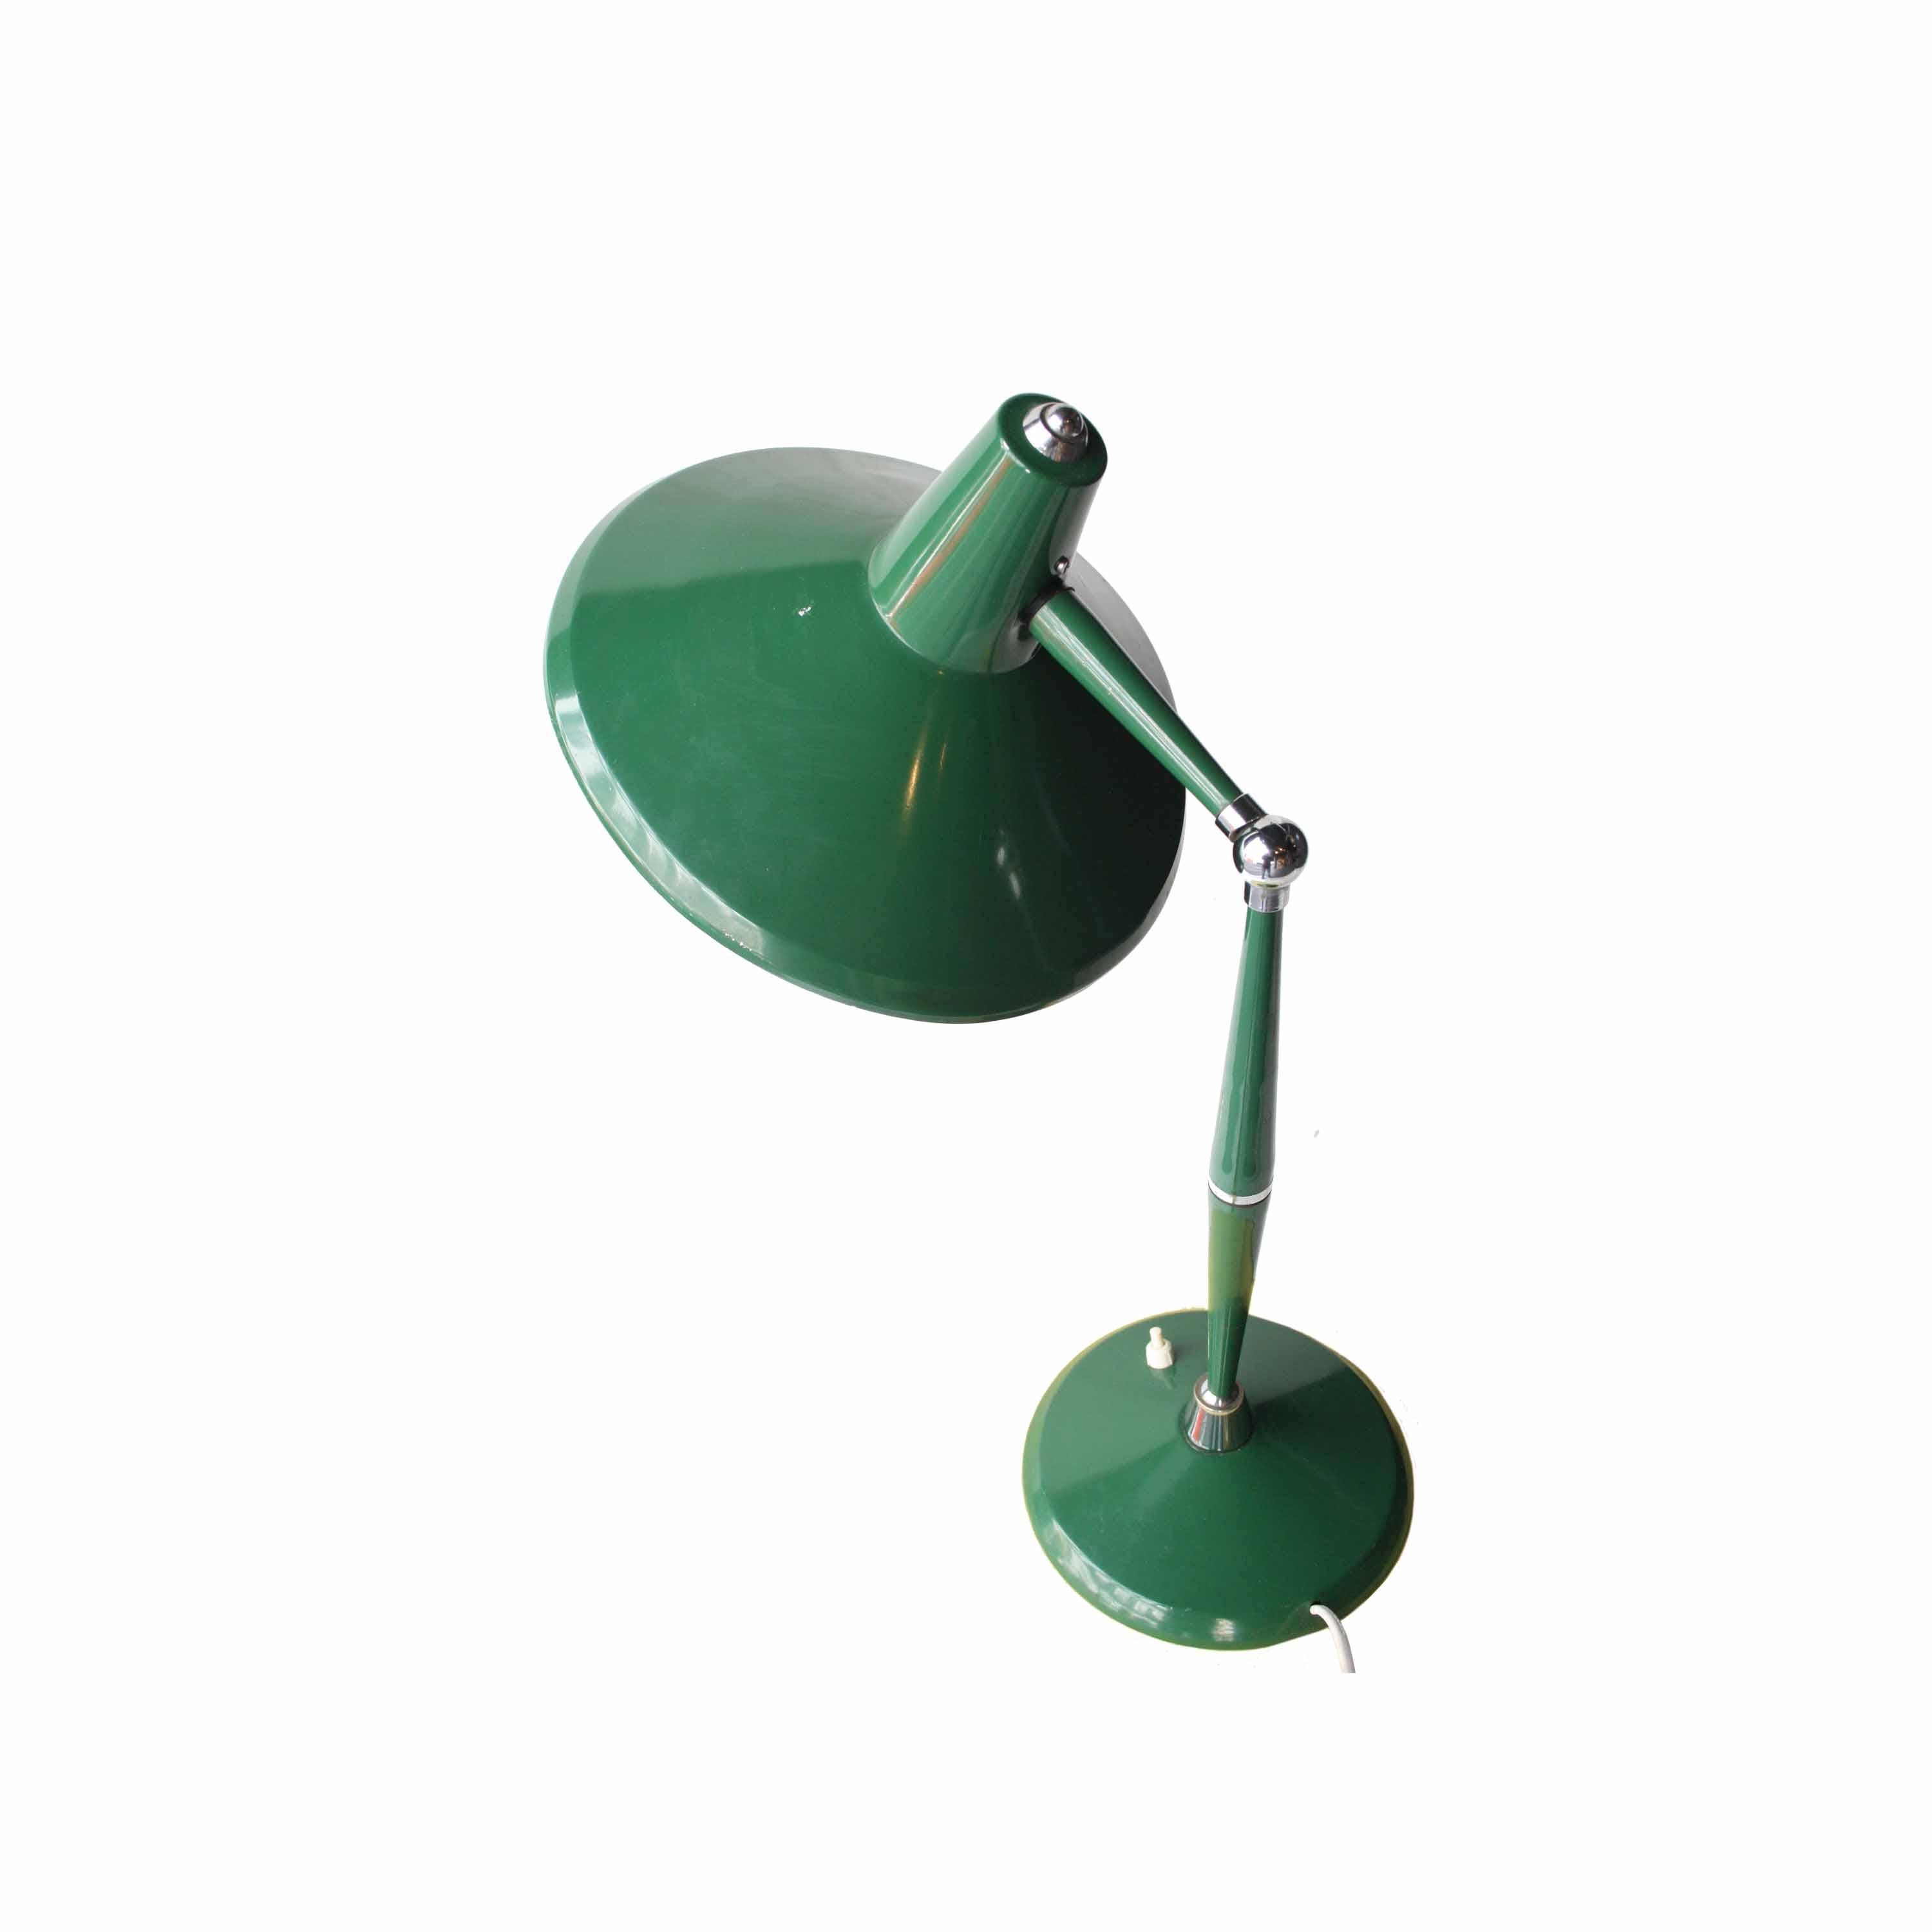 Green table lamp from the Mid-Century period.
The lamp consists of a round-shaped green metal base attached with silver details to a rotating leg with a circular revolving shade.
Both the lamp shade and the leg can be rotated independently to